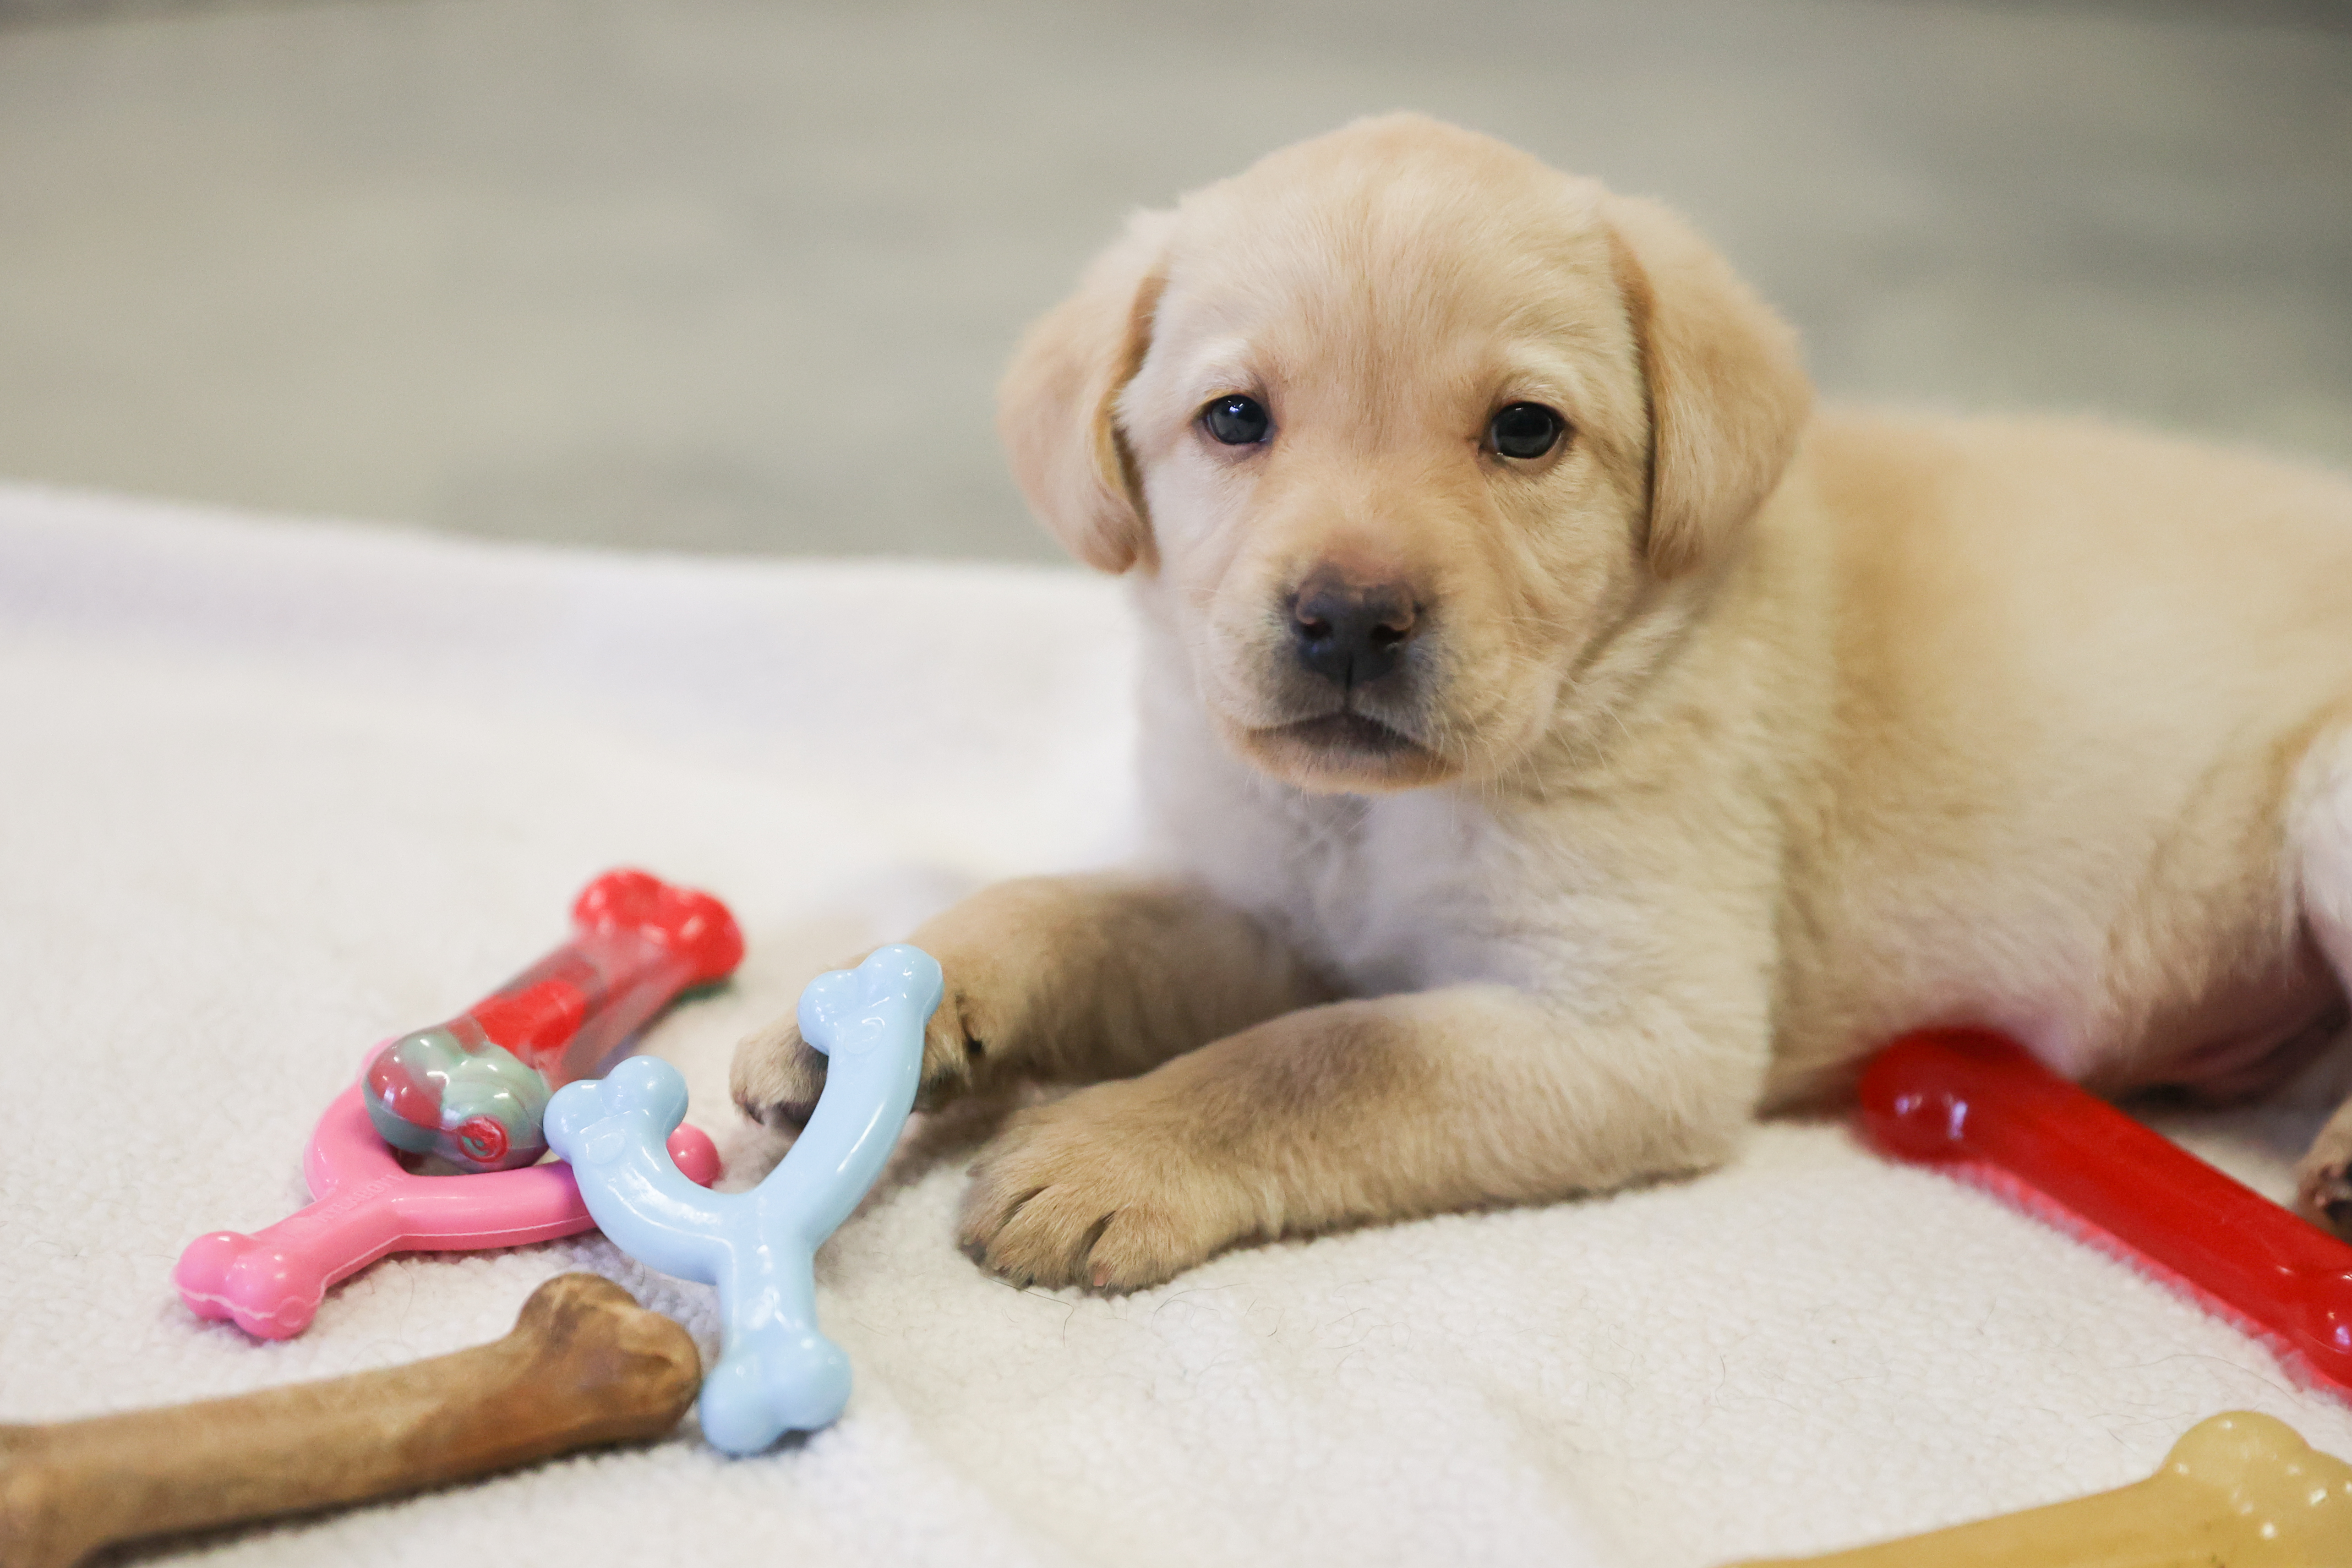 Future Guide Dog Puppy Poses with Nylabone chew toy donation